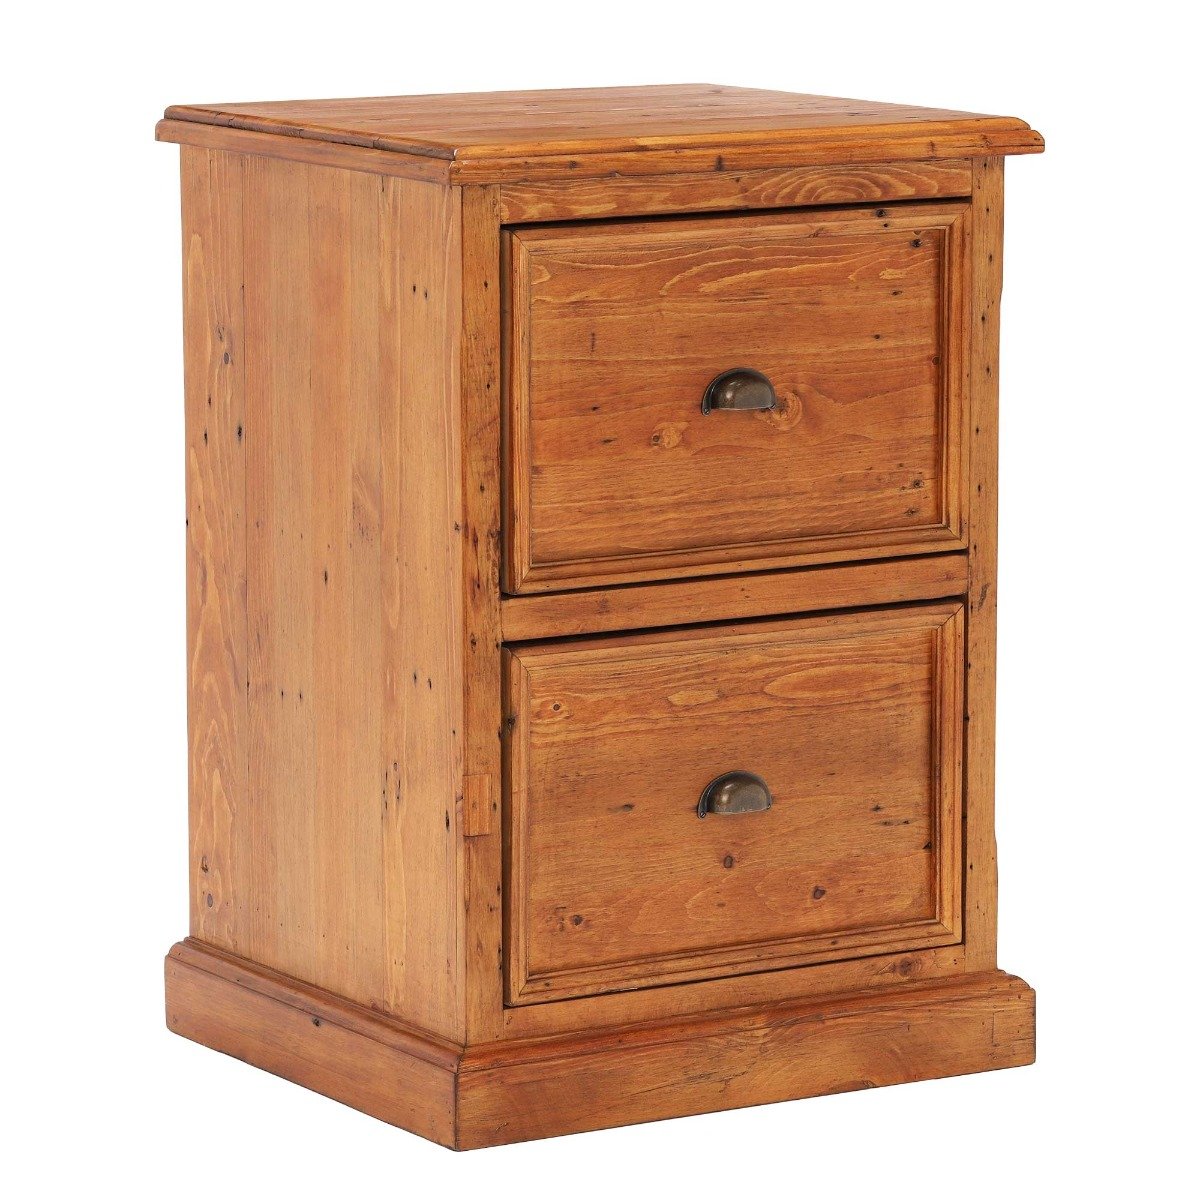 Villiers 2 Drawer Filing Cabinet, Brown | Barker & Stonehouse